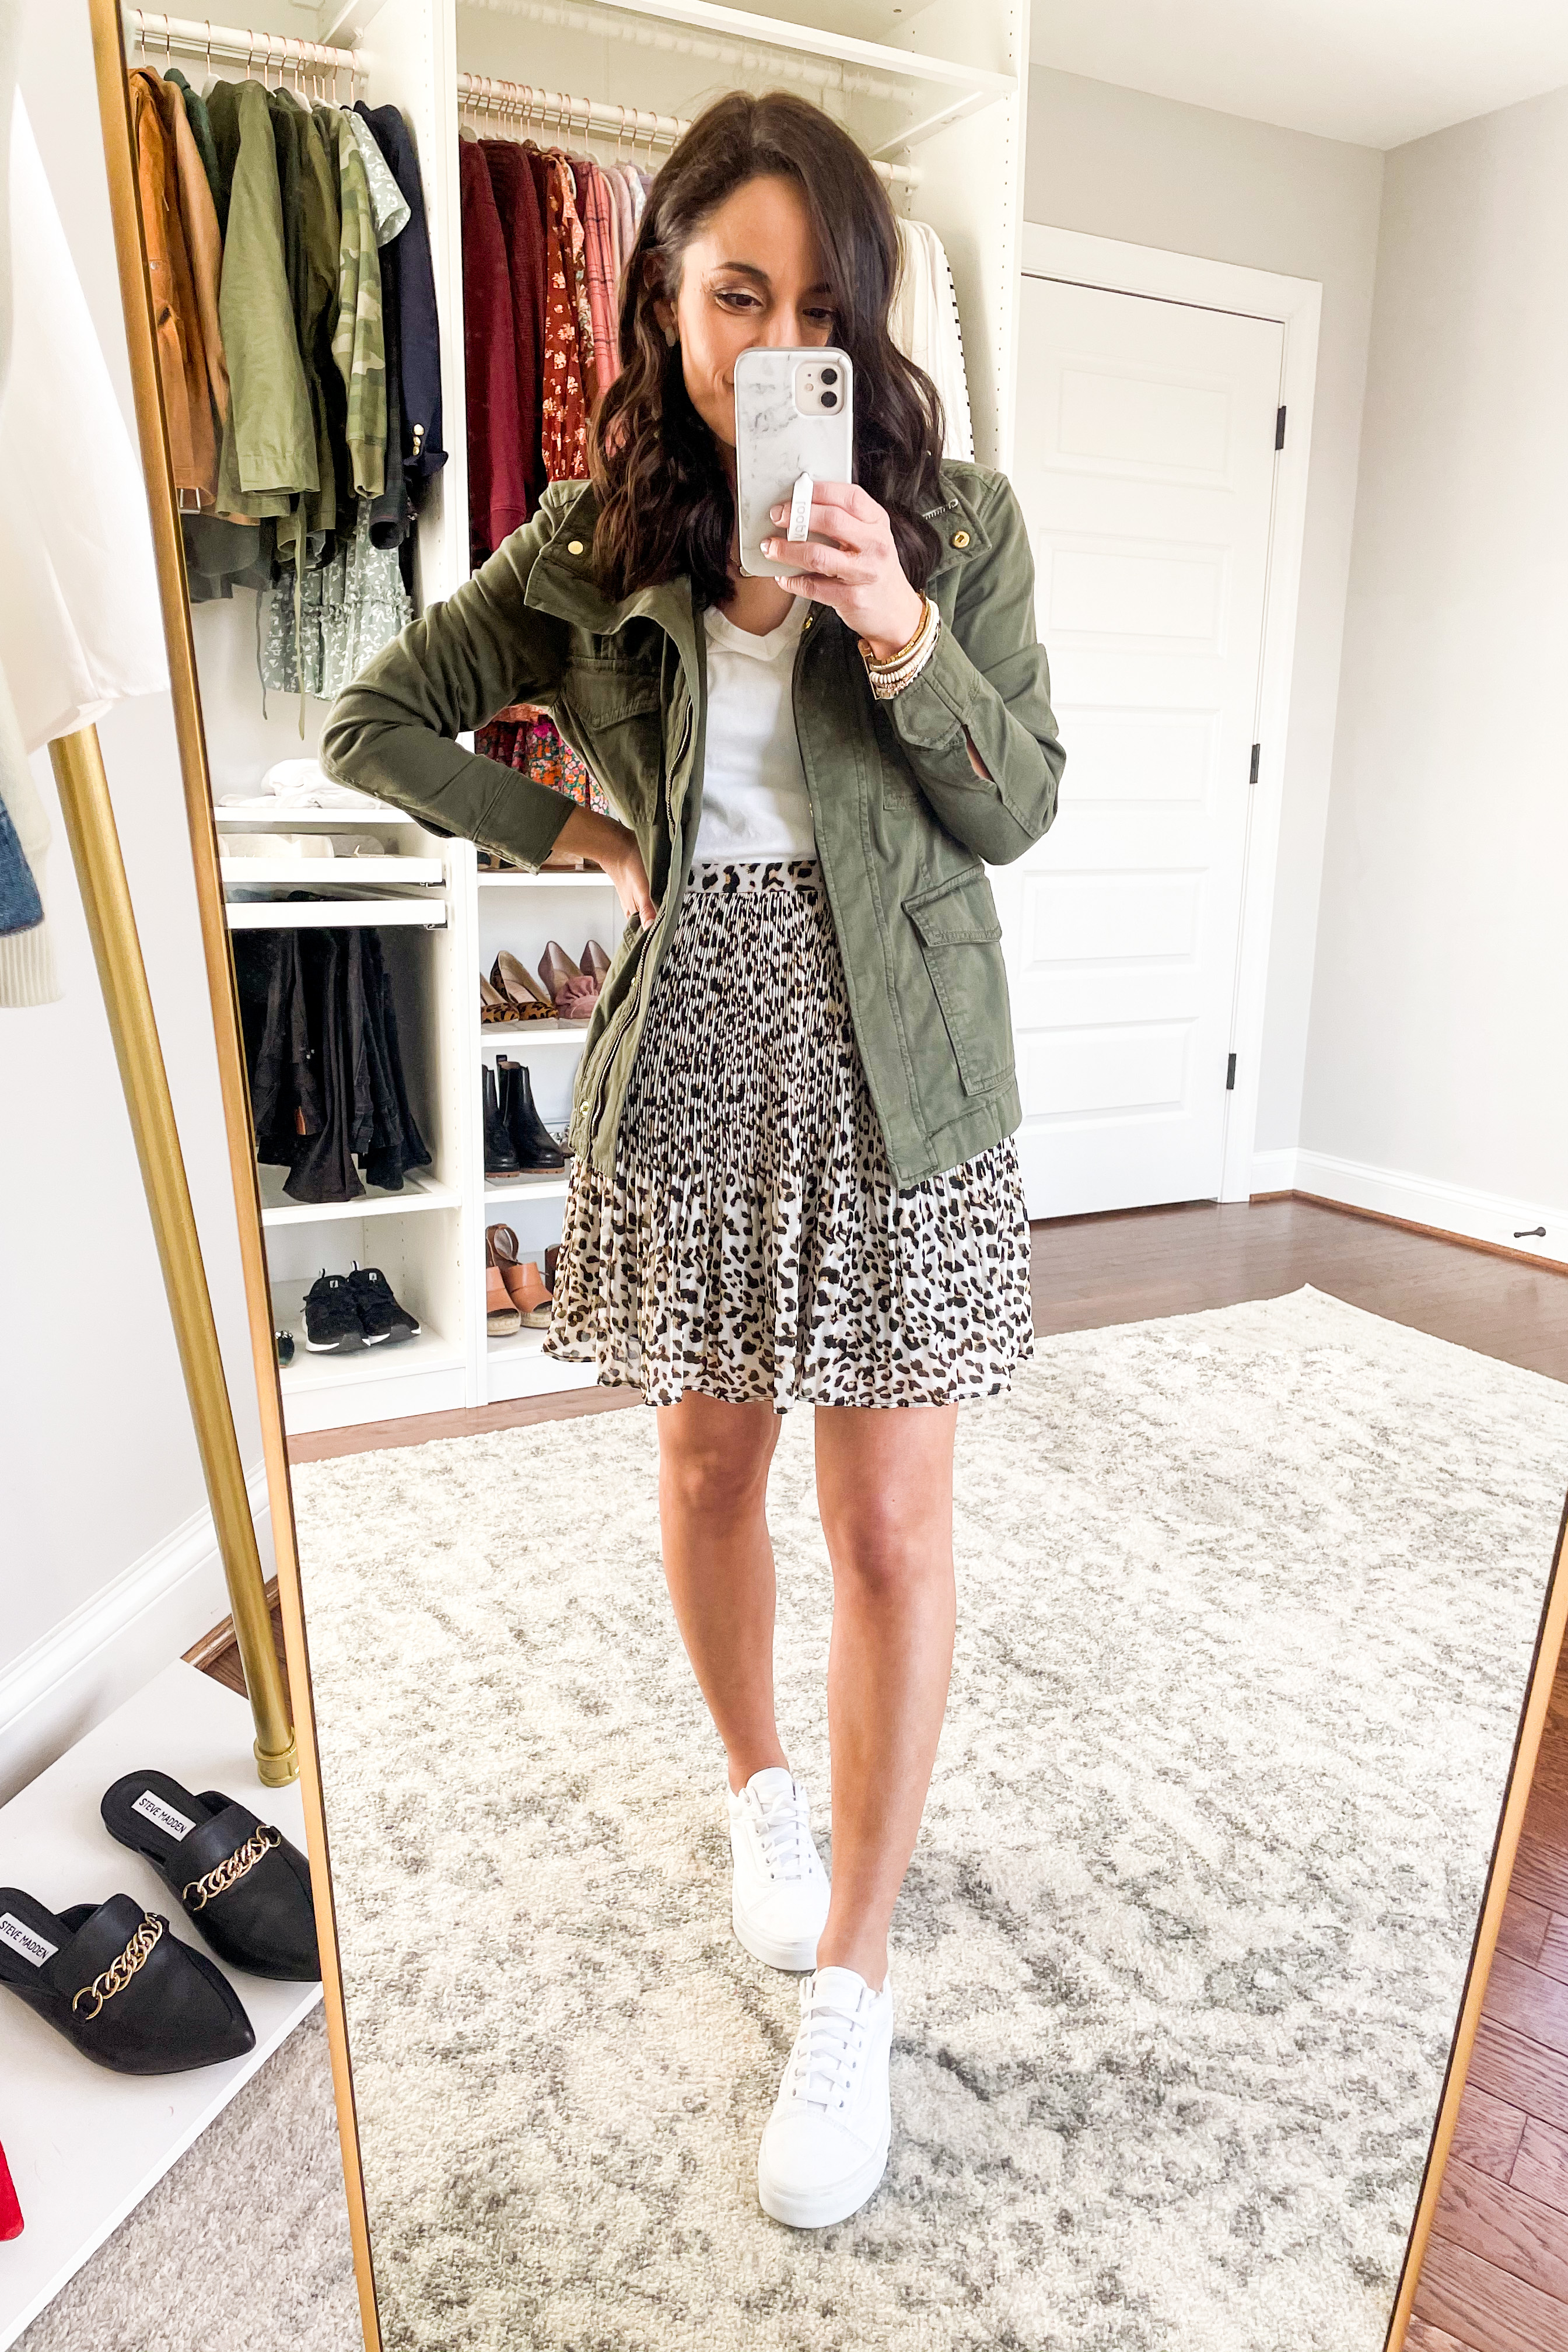 Petite style blogger | olive jacket outfit | leopard skirt outfit | 10 items 20 outfits | sneakers with skirt outfits 